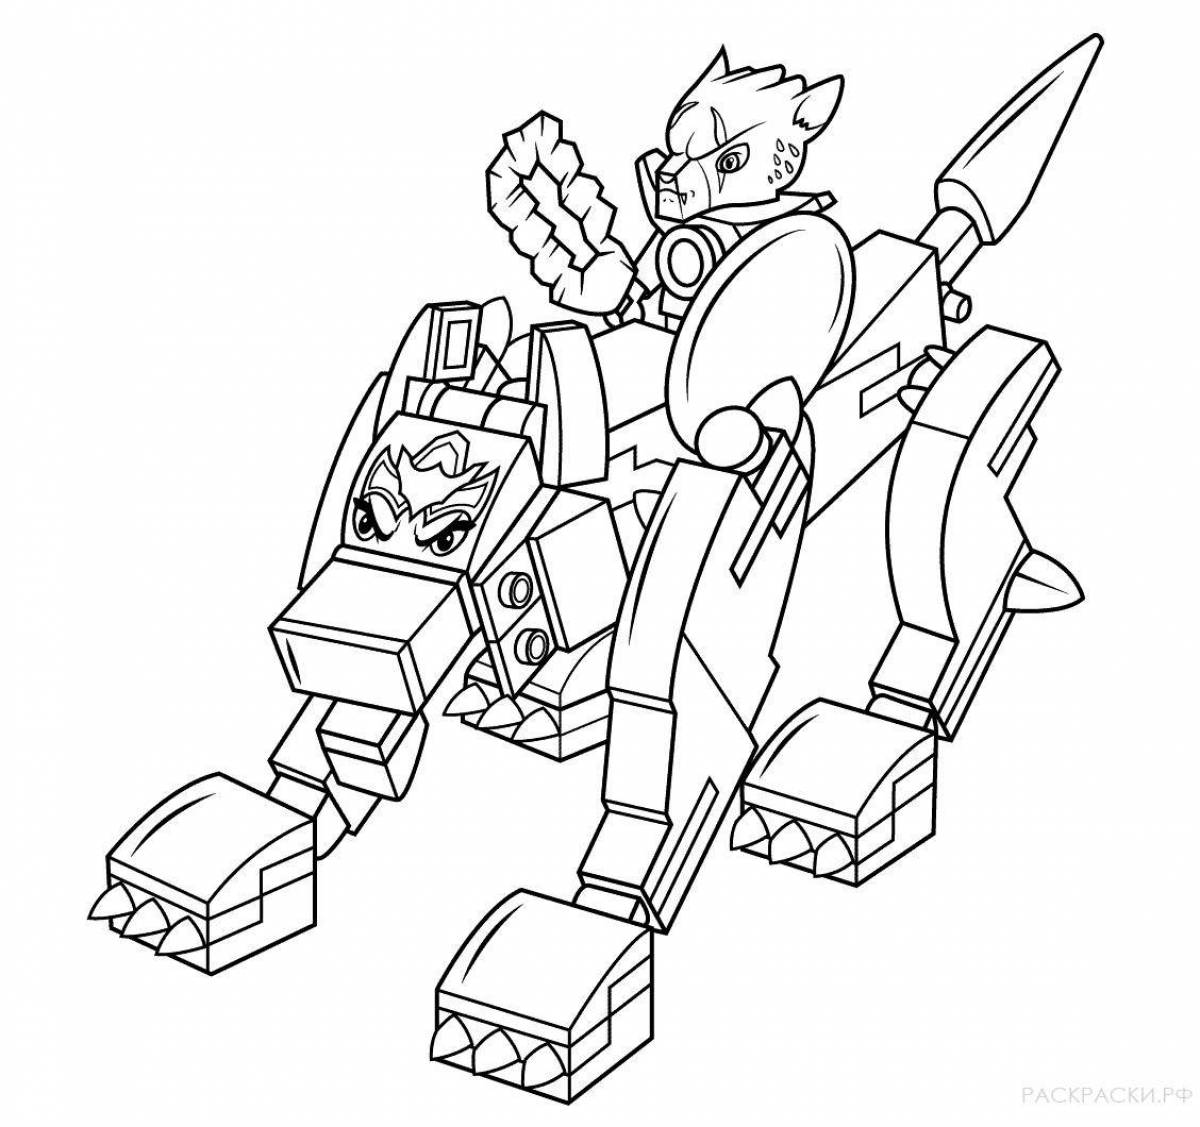 Complex minecraft robot coloring page